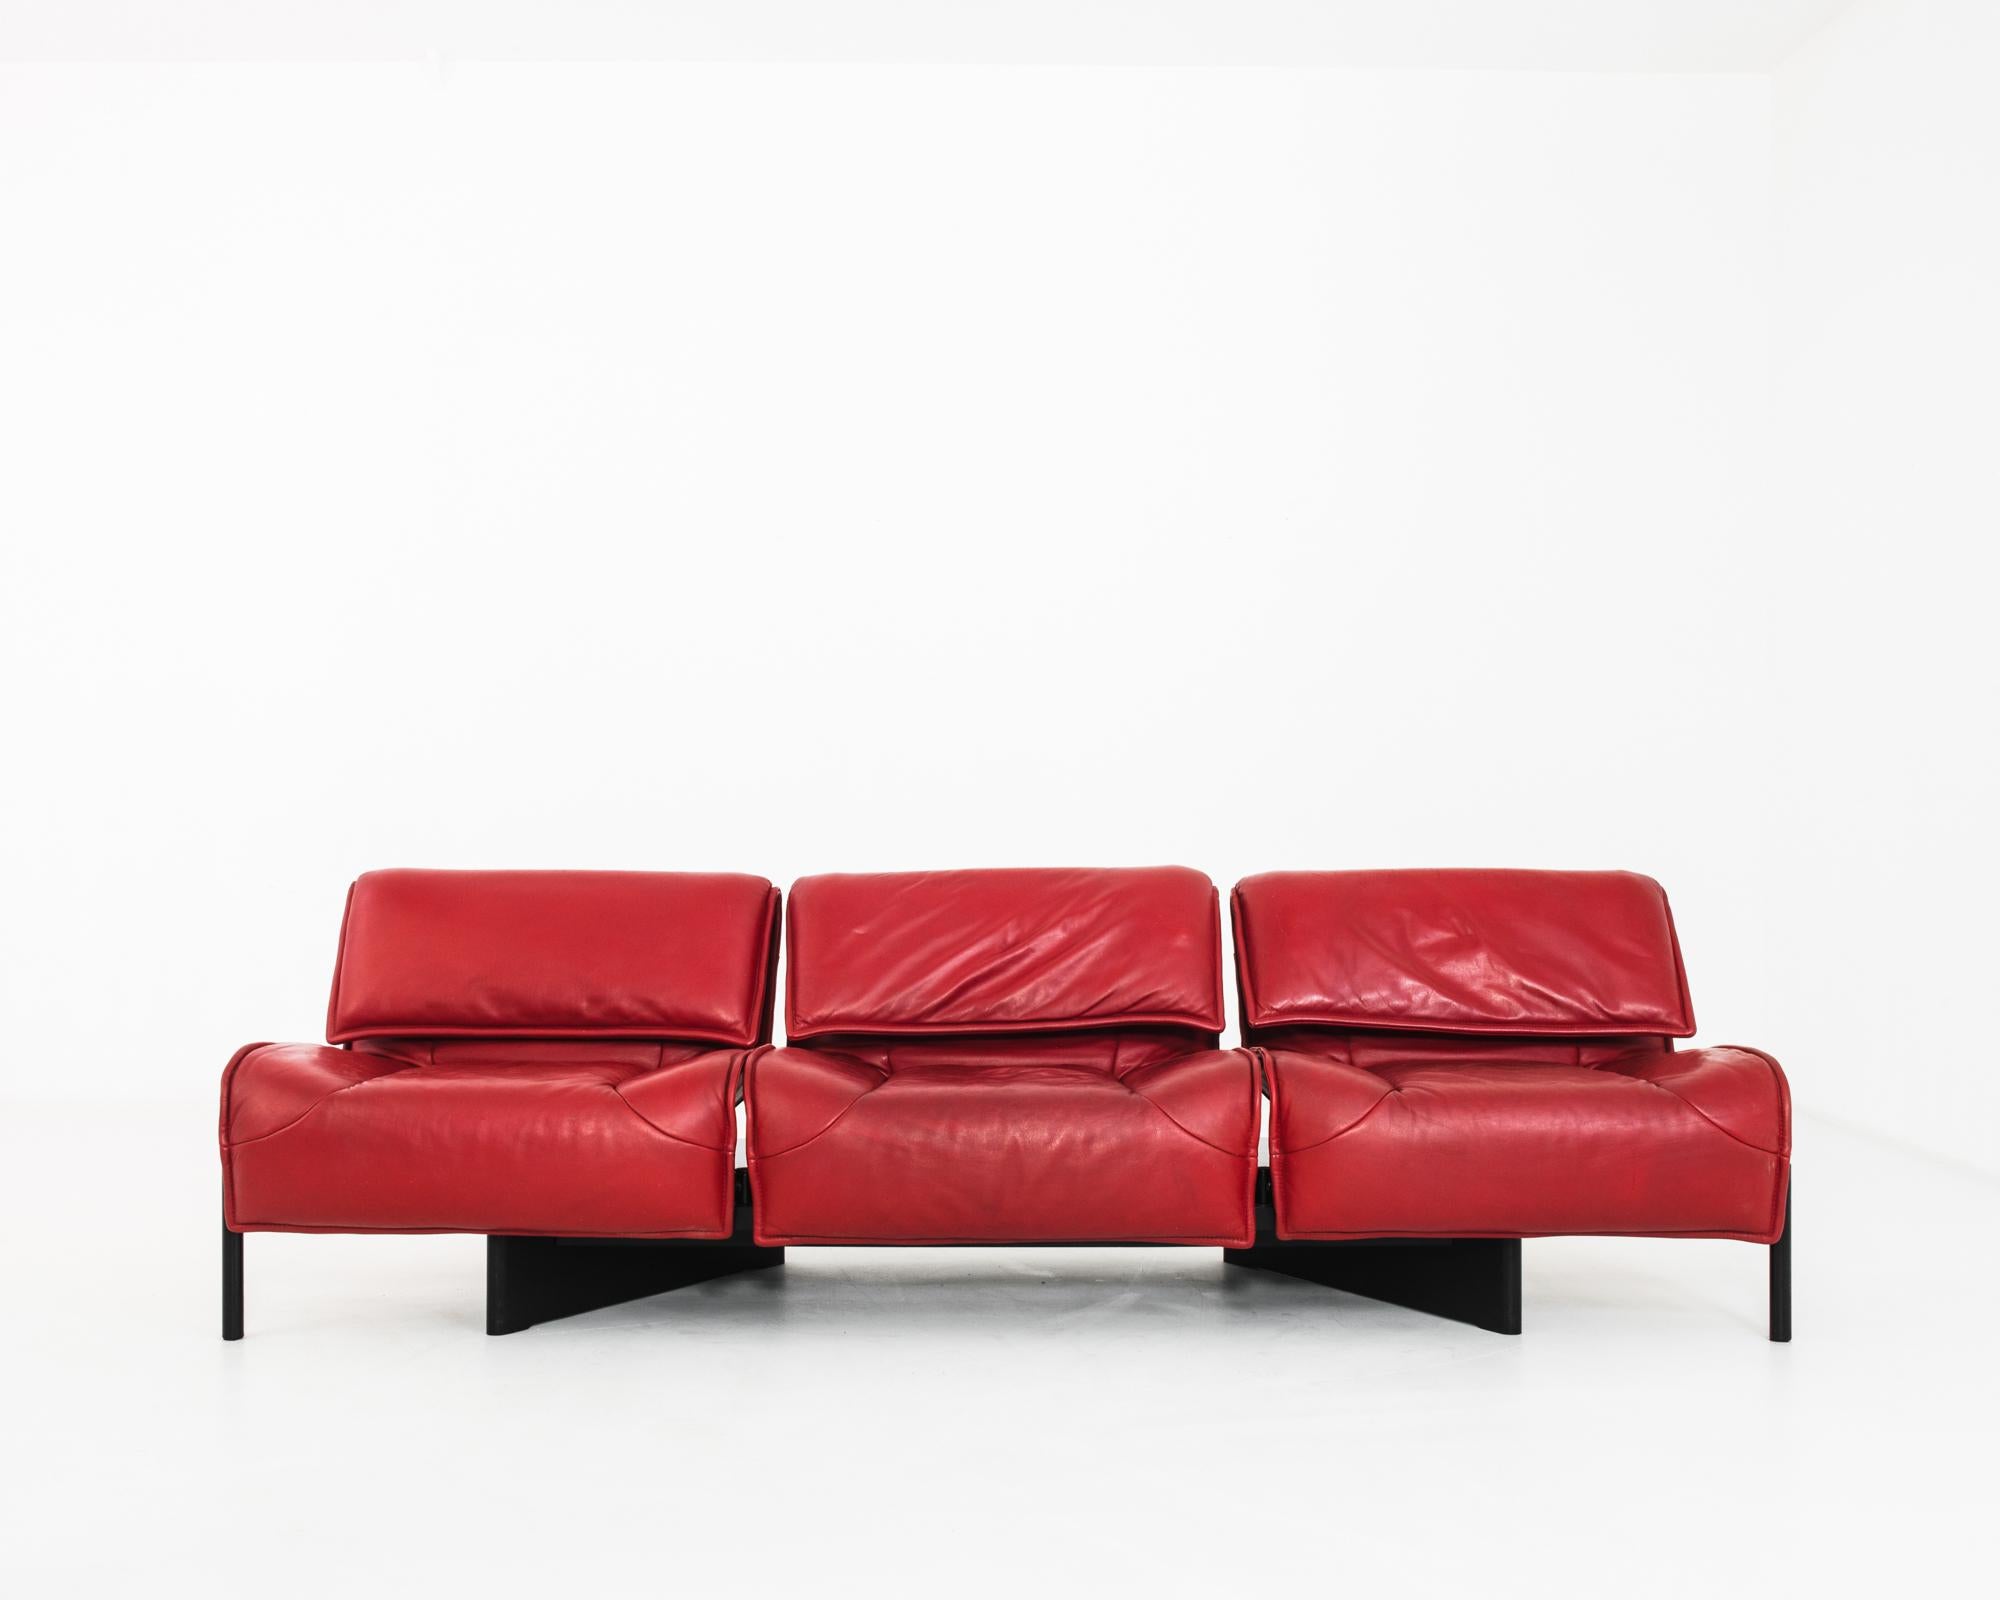 A Veranda model 3-seater sofa, designed by renowned Italian Industrial designer Vivo Magistretti for Cassina in the 1980s. Three seats, upholstered in bright burgundy leather, swivel on their axes to allow a range of seating configurations — from